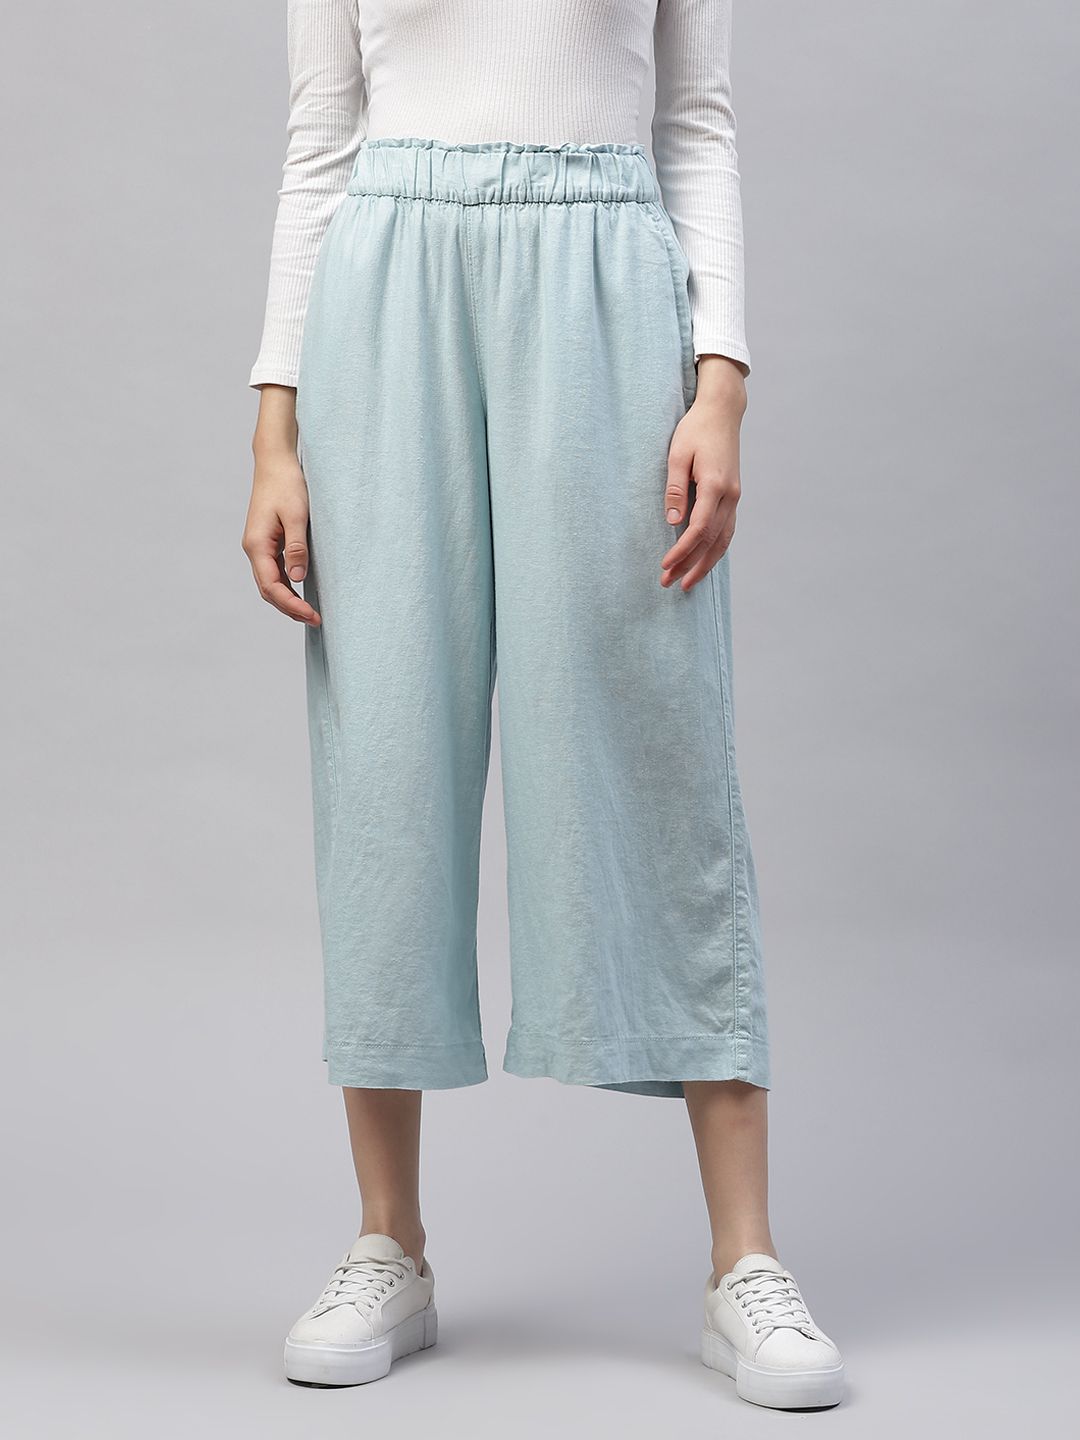 Marks & Spencer Women Blue Culottes Price in India